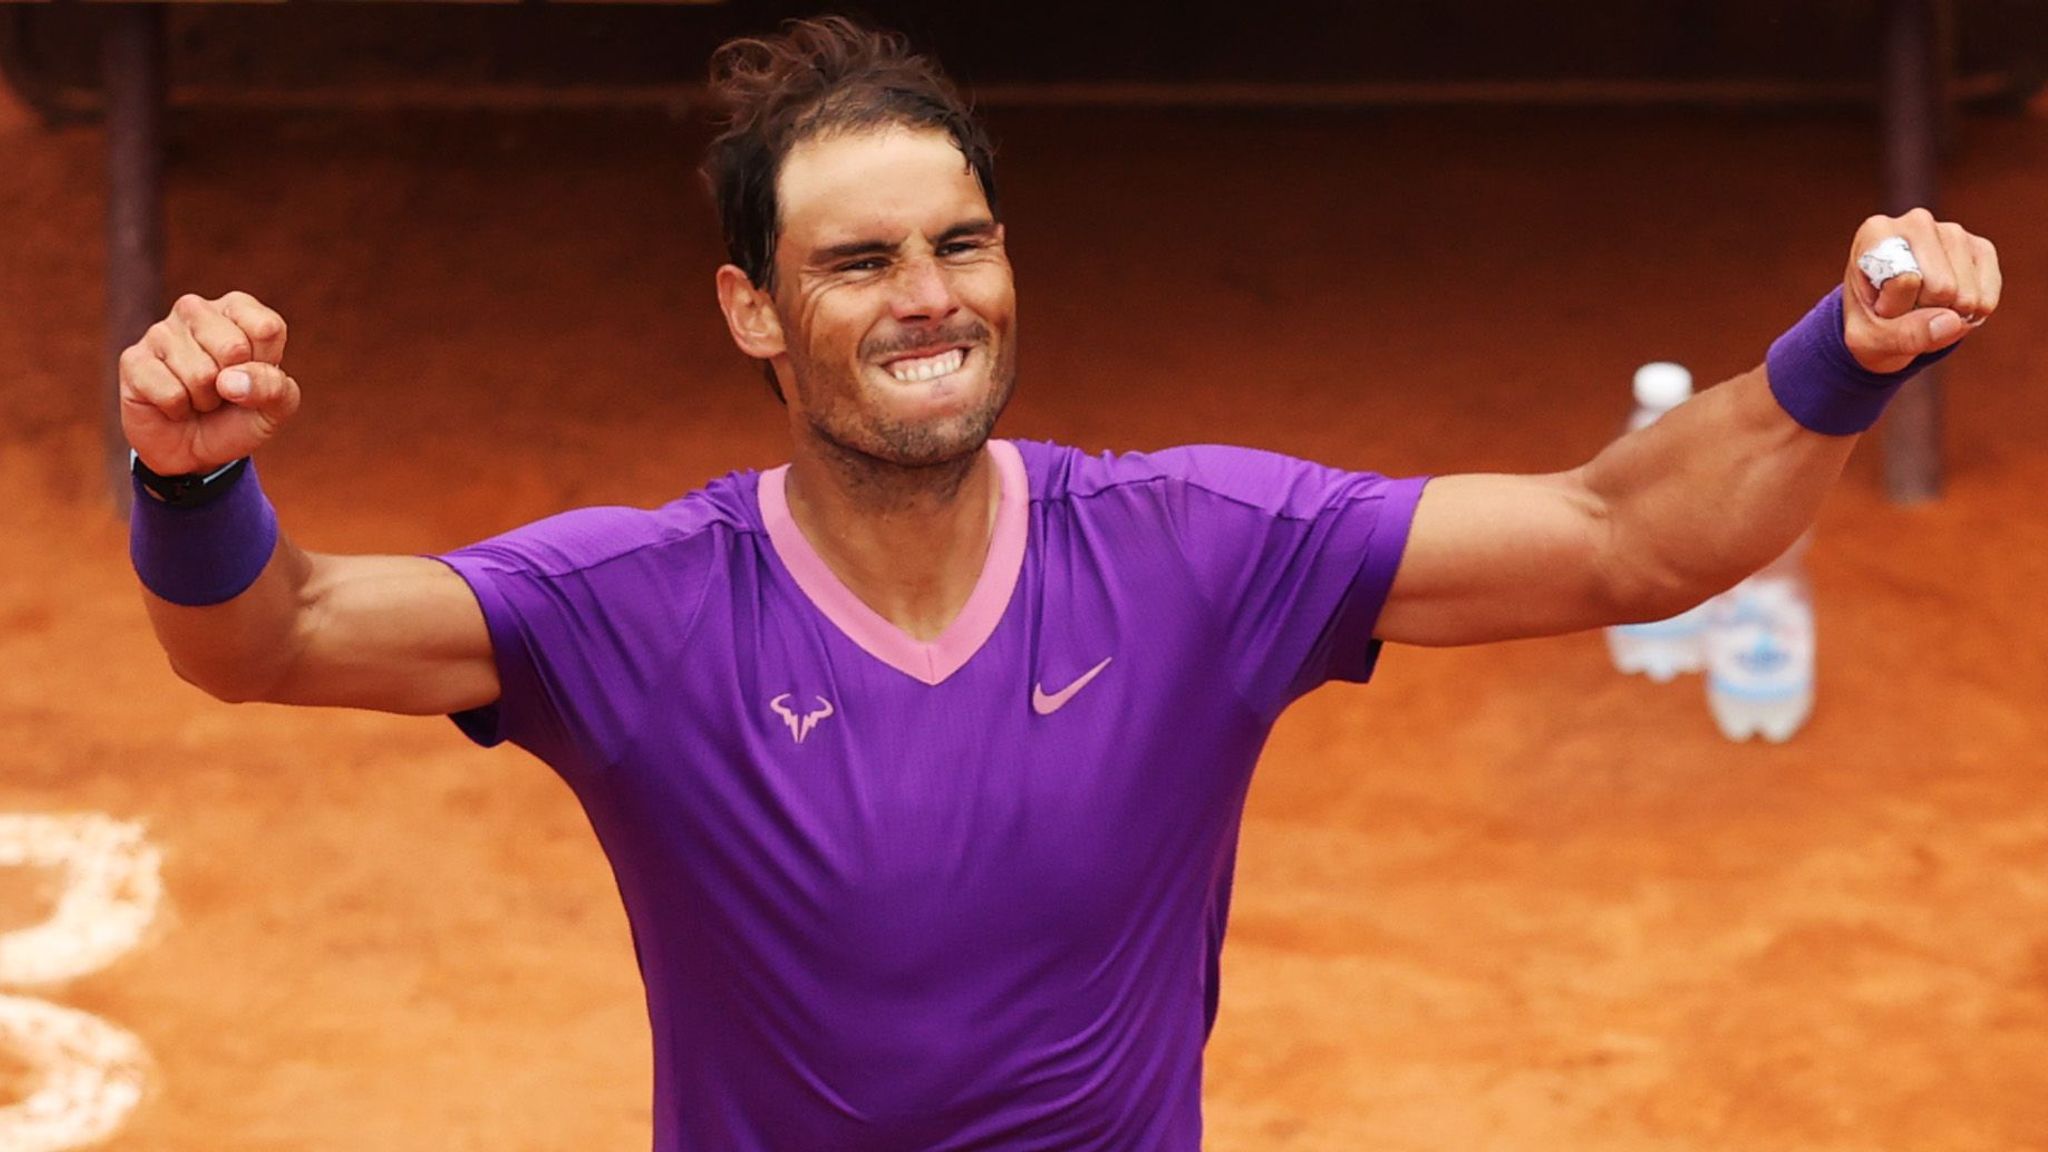 Rome Masters Rafael Nadal gains revenge over Alexander Zverev to stay on track for 10th title Tennis News Sky Sports